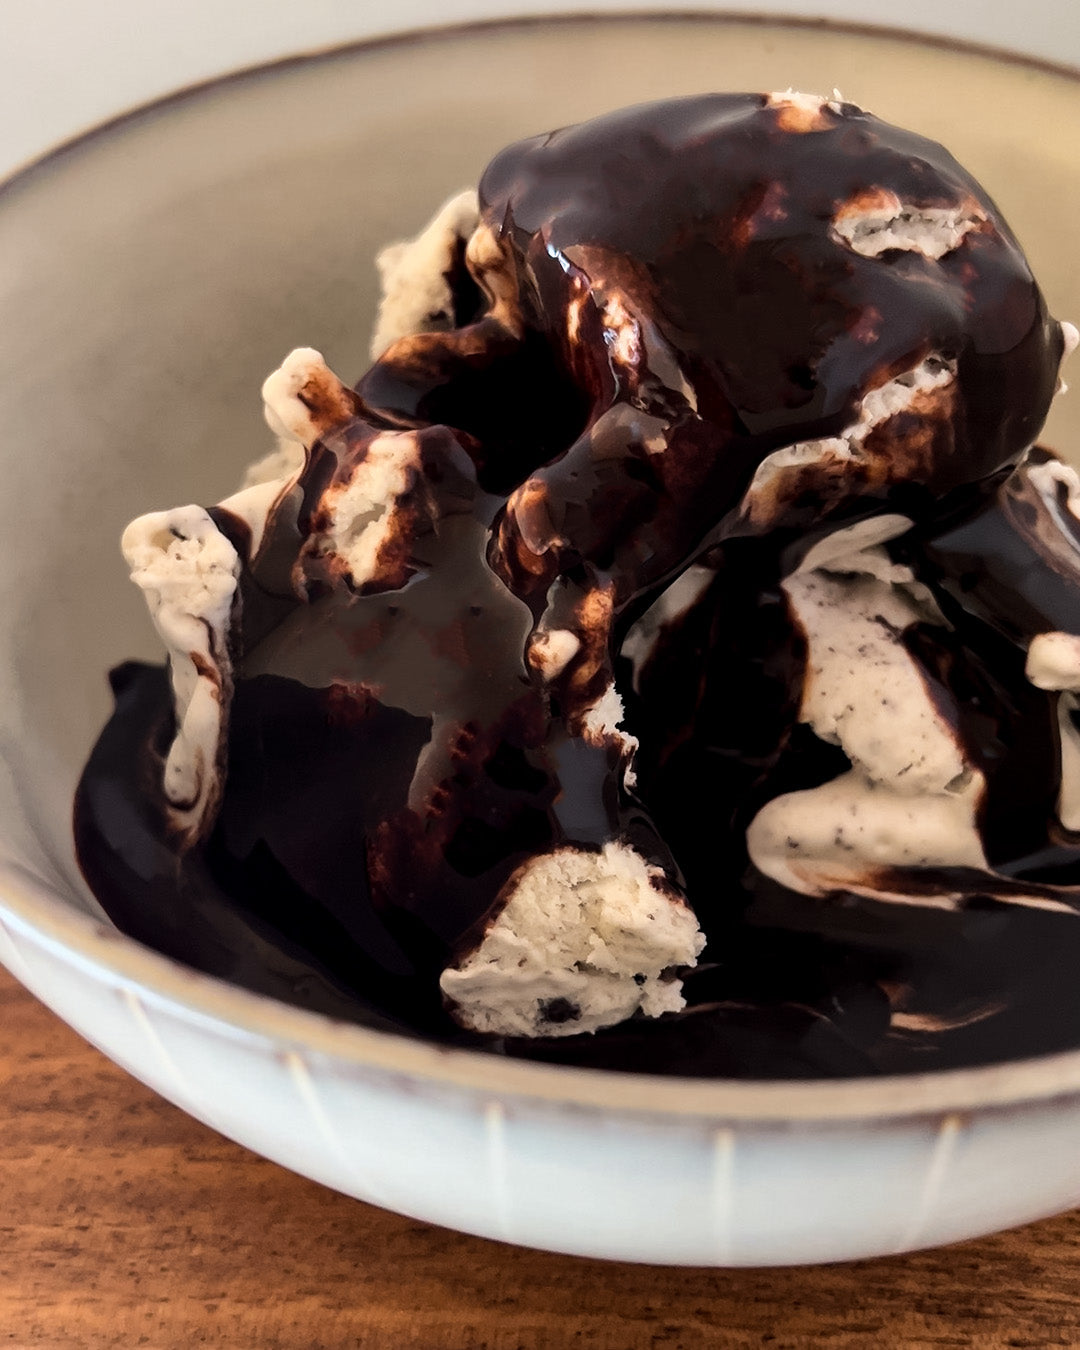 Chocolate Syrup 101, pt. 2